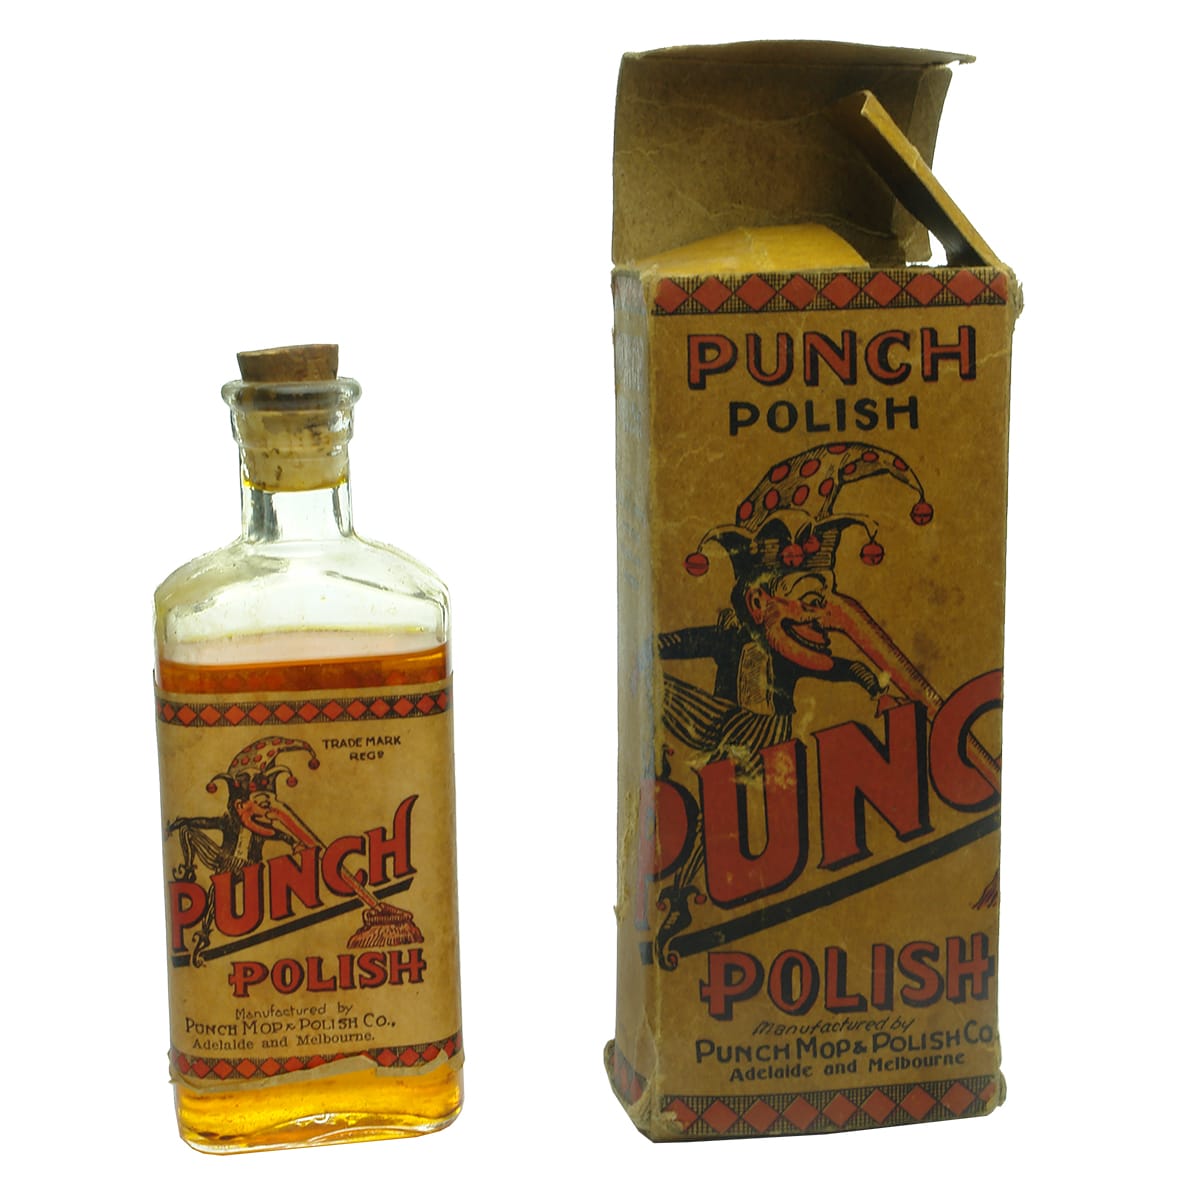 Punch Polish Labelled Bottle and Box.